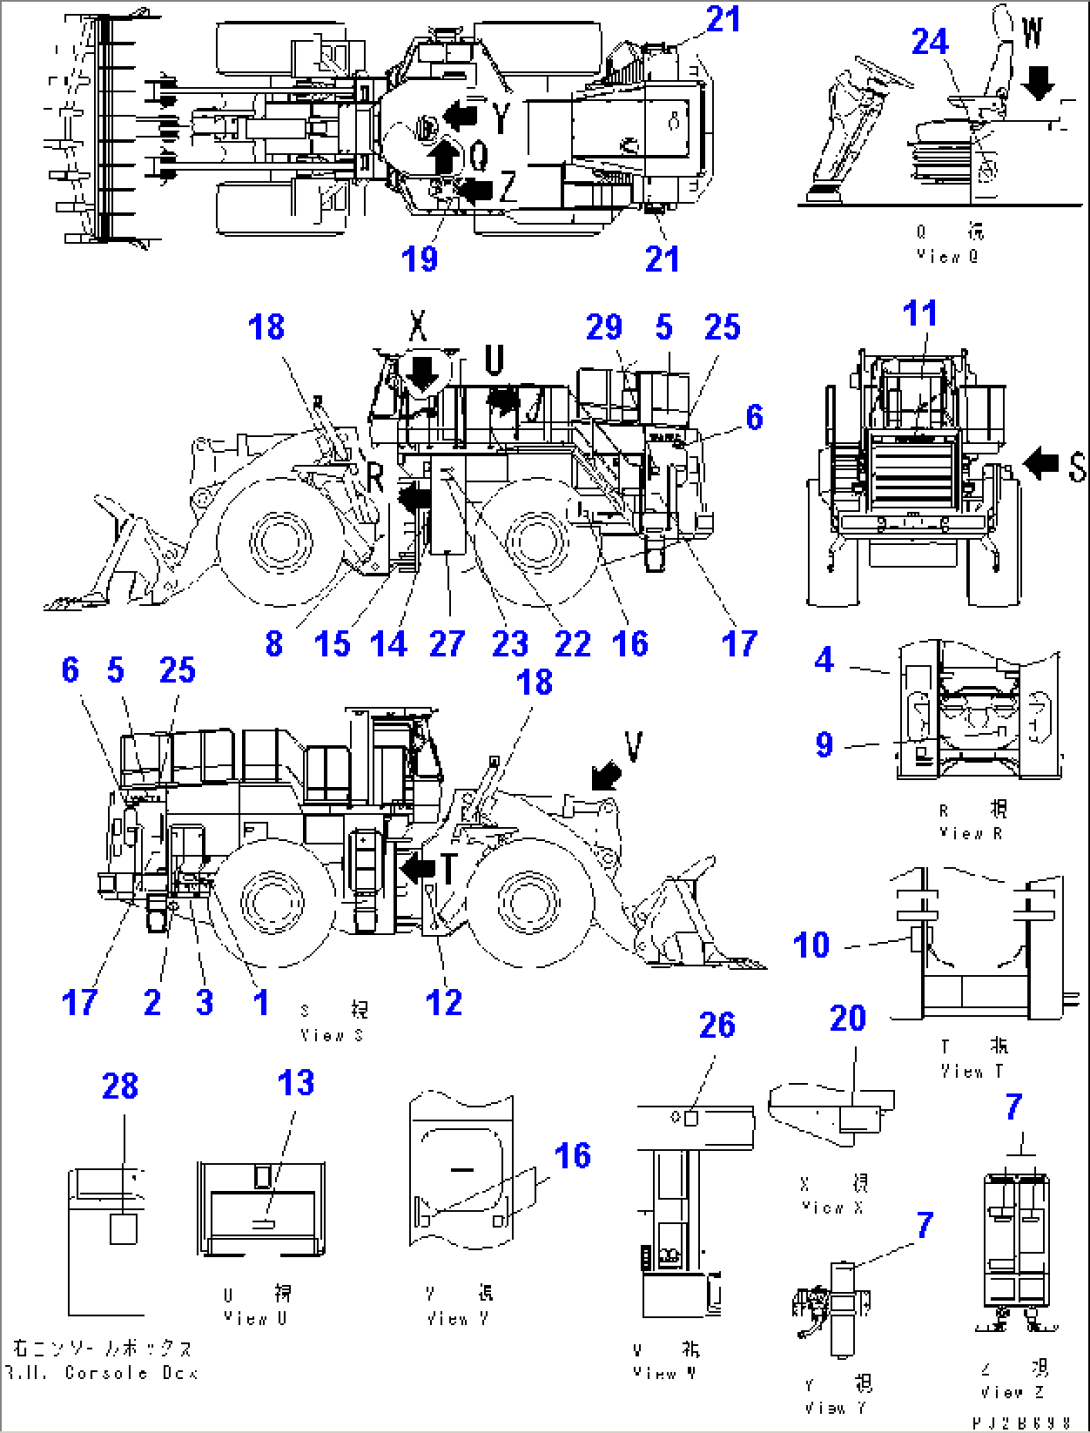 MARKS AND PLATES (FRENCH)(#50019-51000)